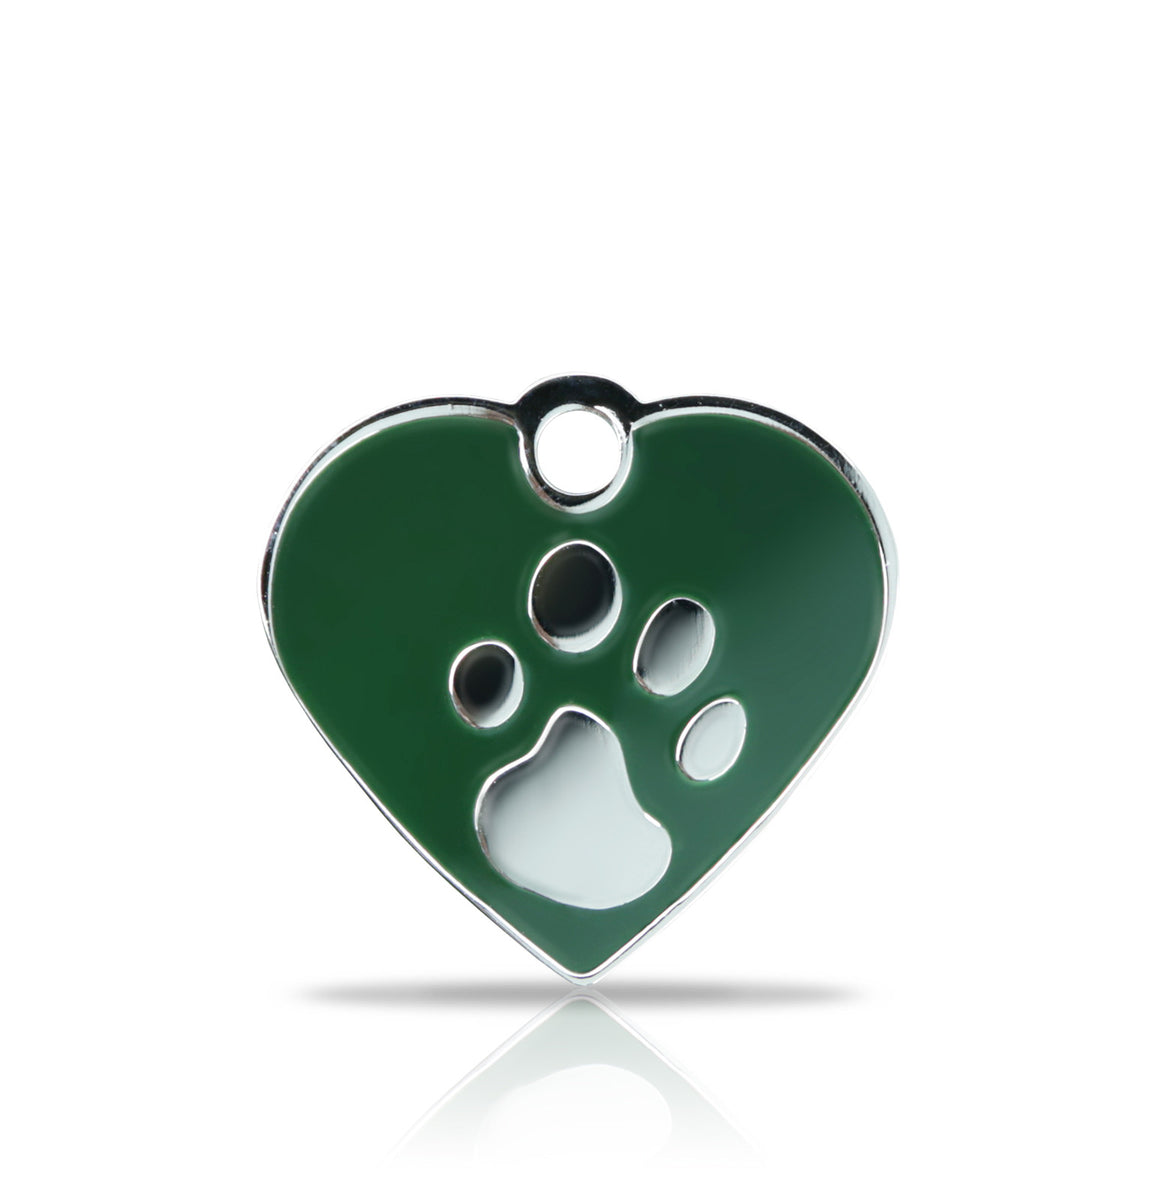 TaggIT Elegance Small Heart Green & Silver iMarc Pet Tag